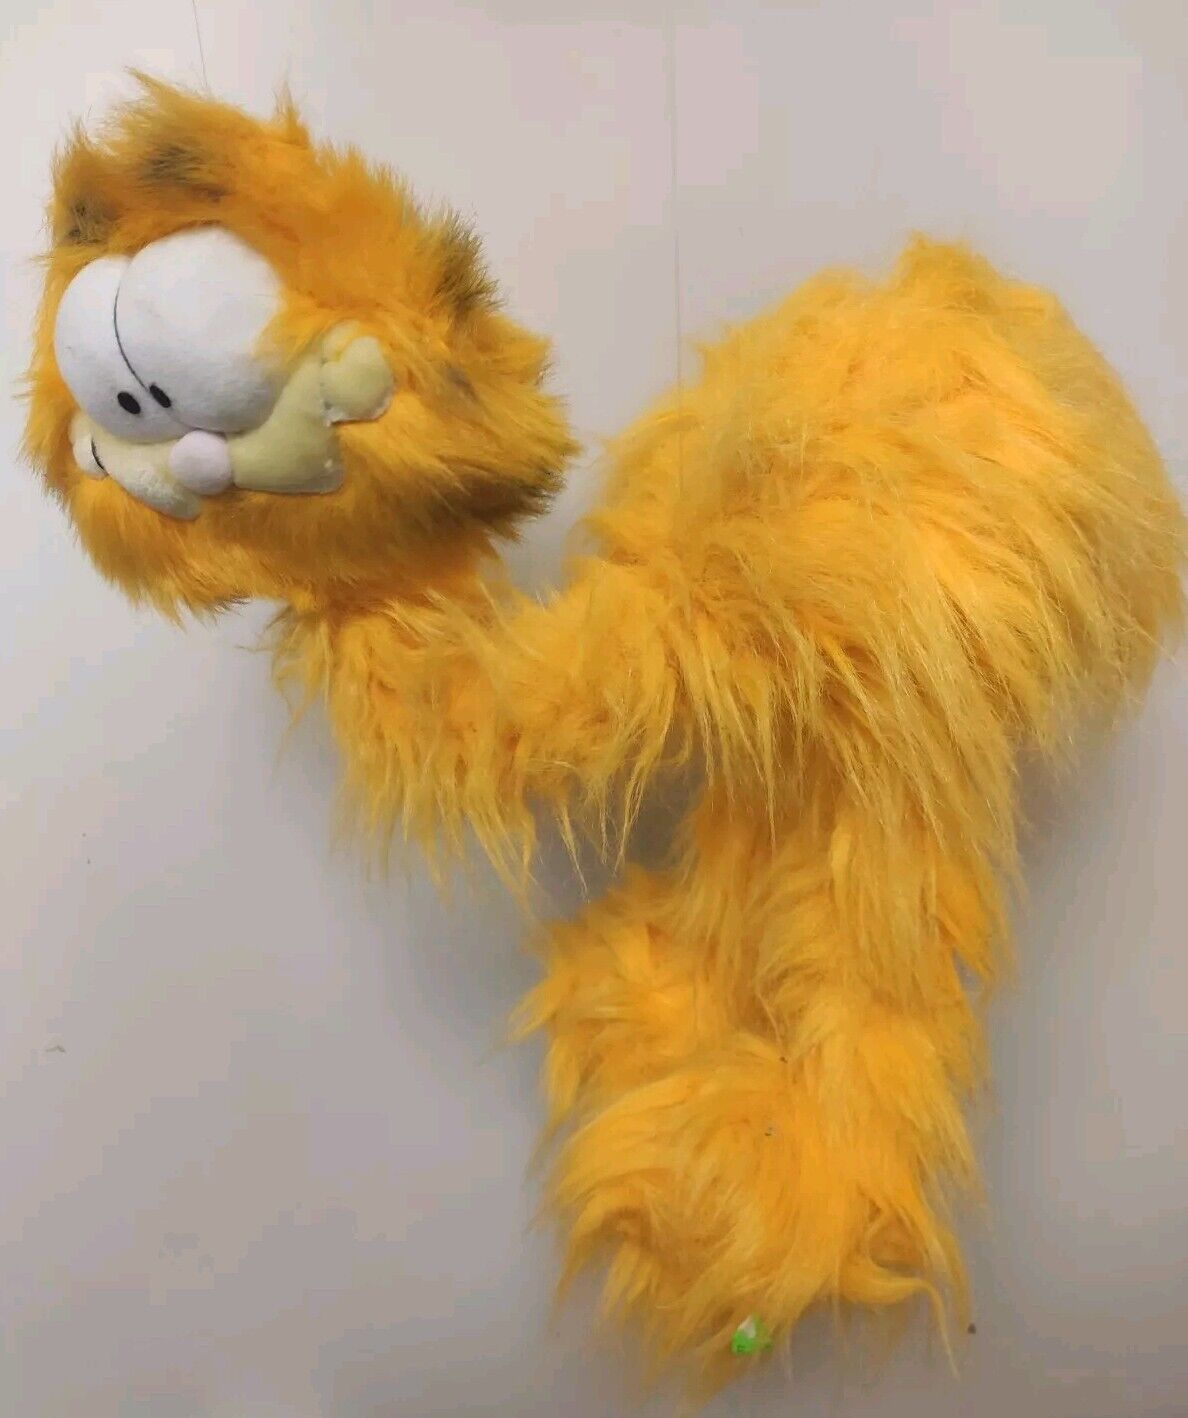 Vintage 1980s Garfield Plush Creations Marionette String Puppet Shaggy Cat